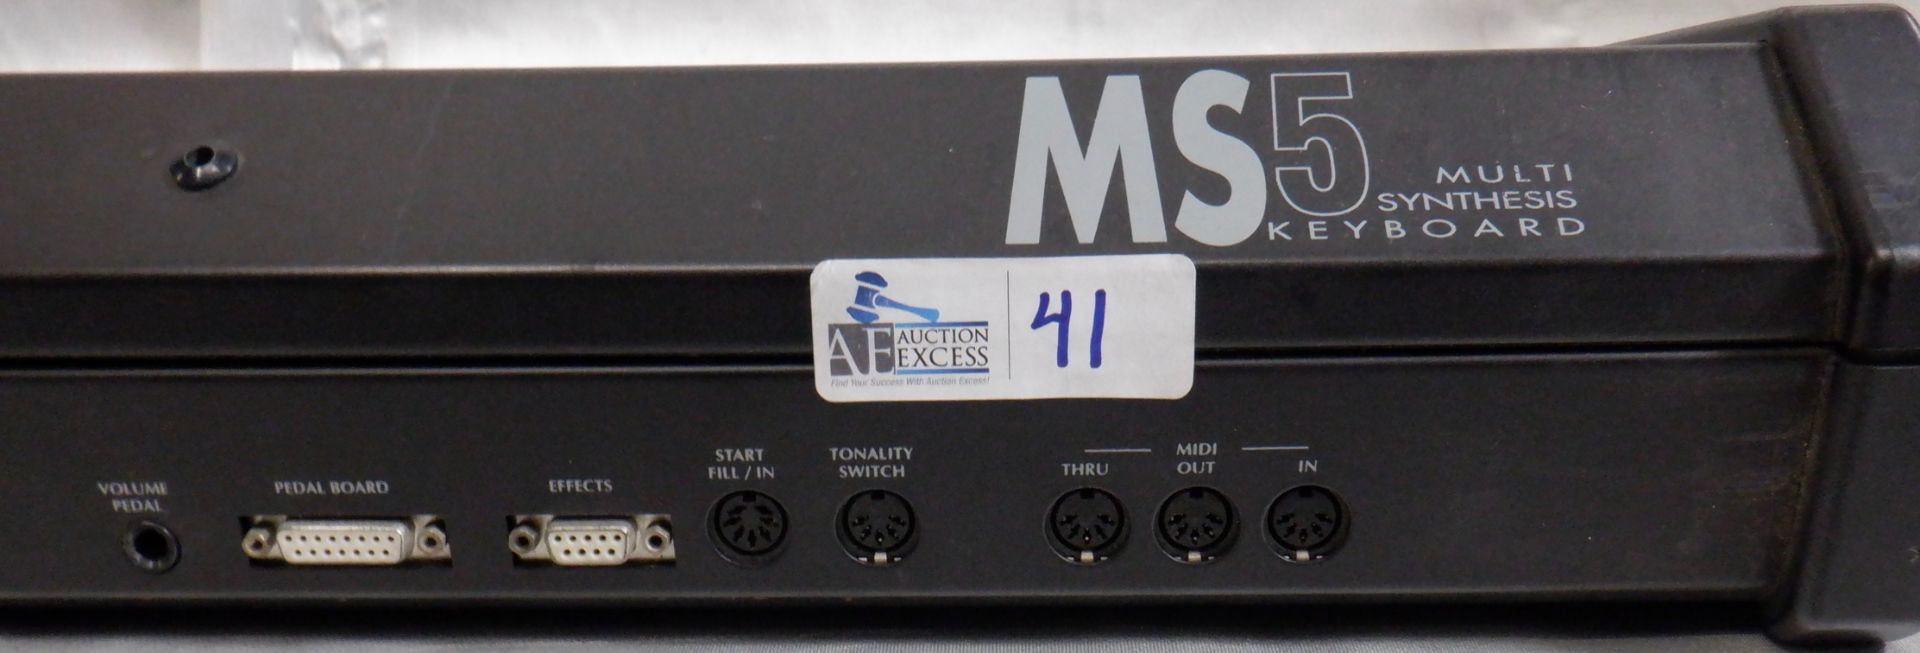 SOLTON MS5 SYNTHESIZER - Image 5 of 5